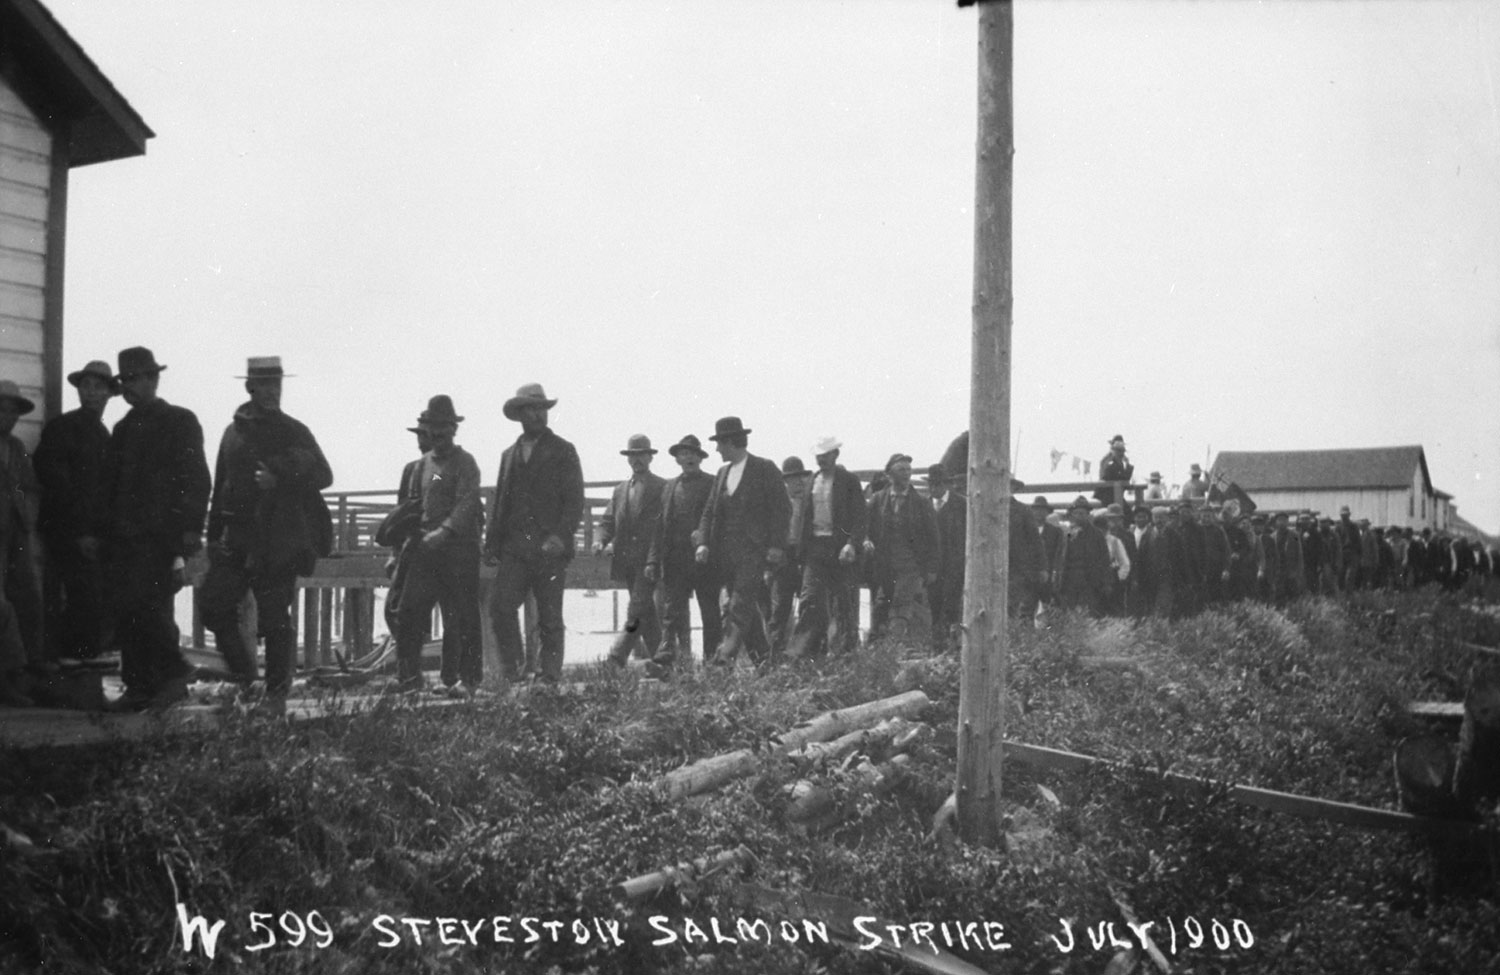 Men walk in a long line on a path on the dike along the Steveston waterfront.